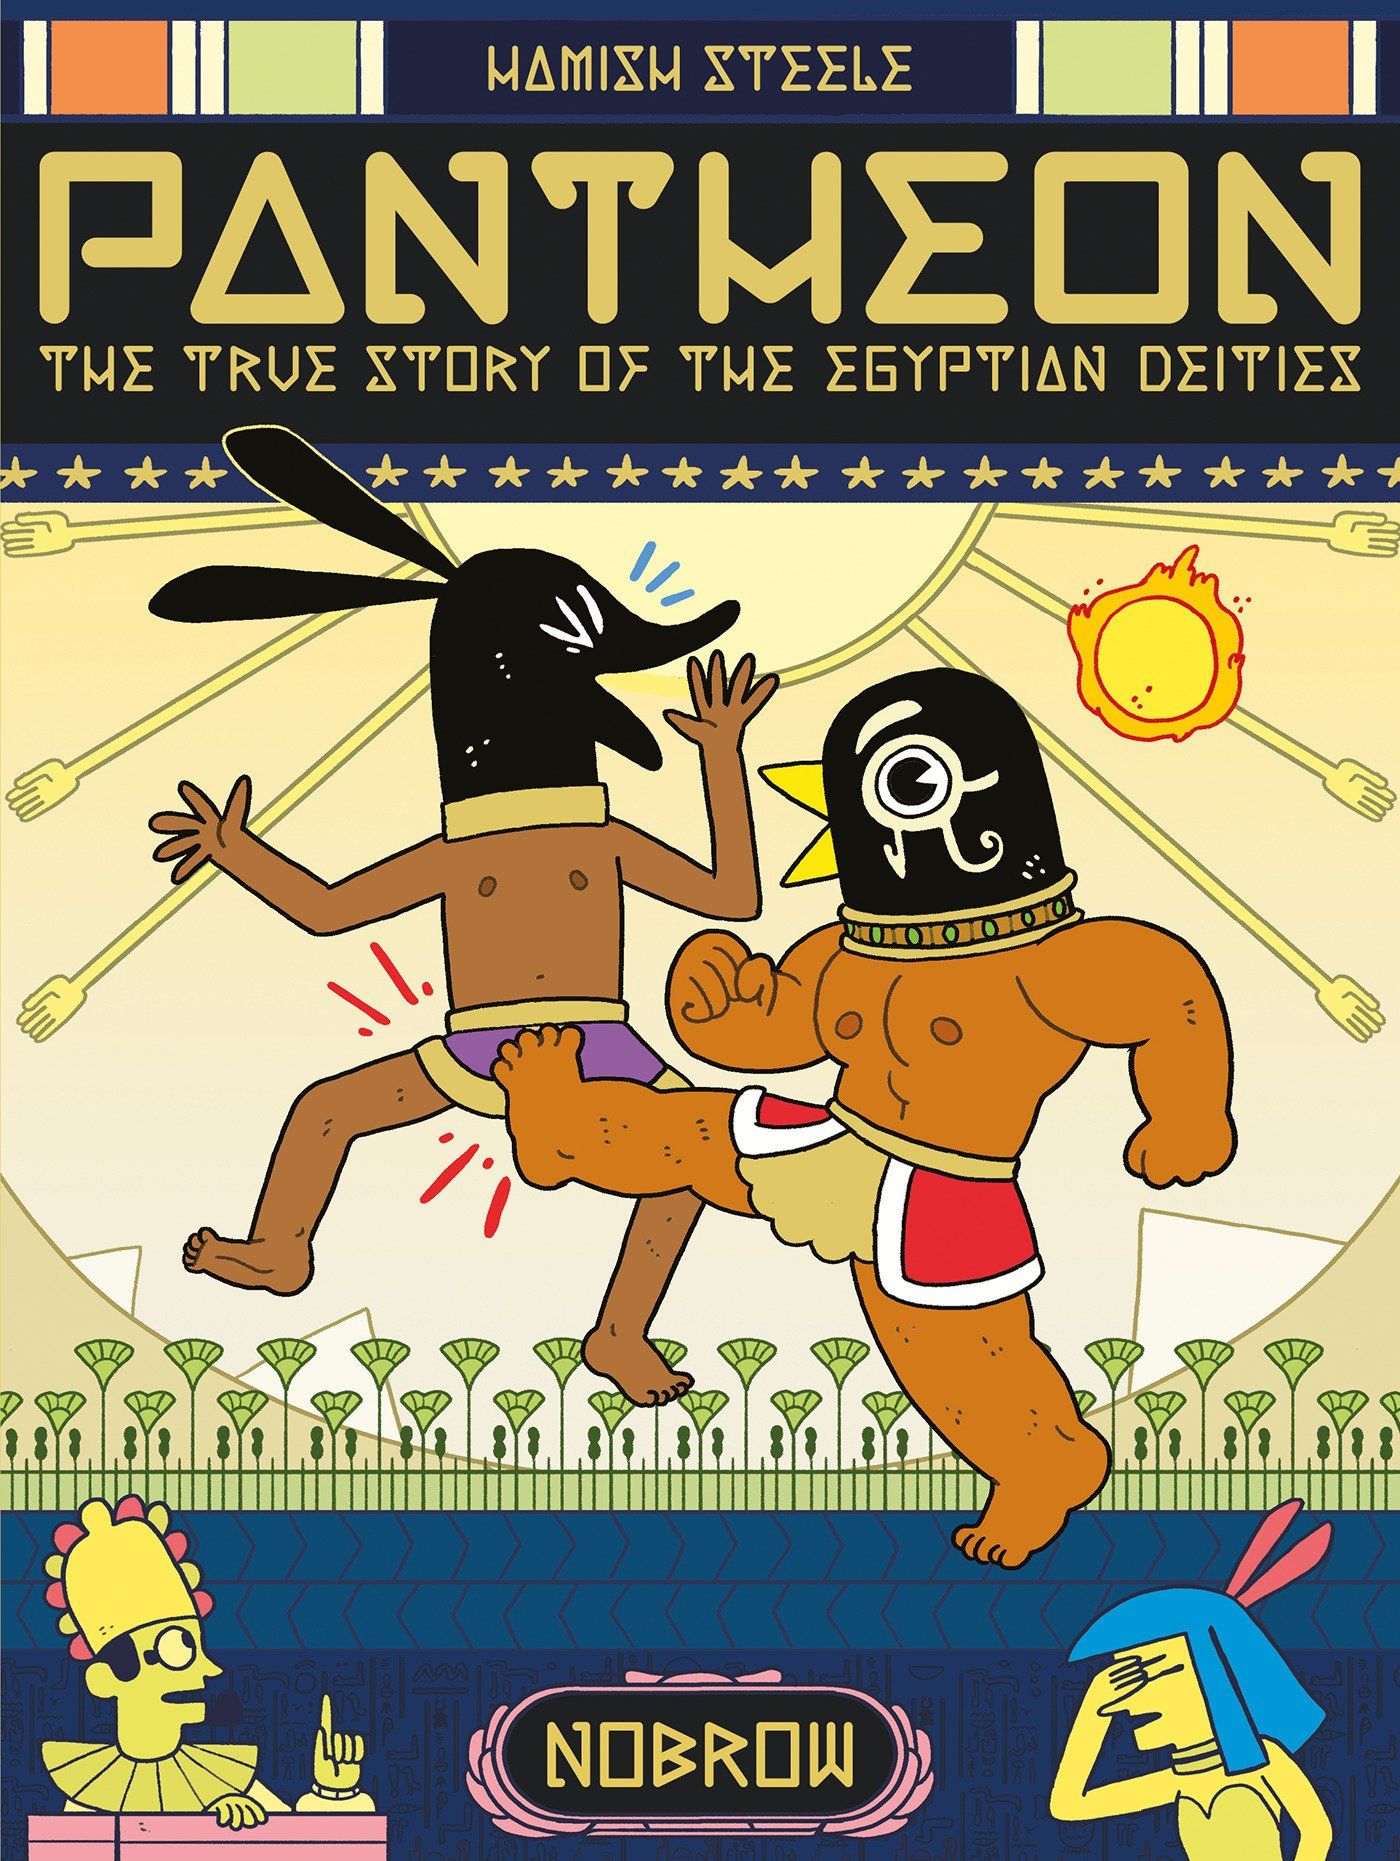 book cover of pantheon by hamish steele